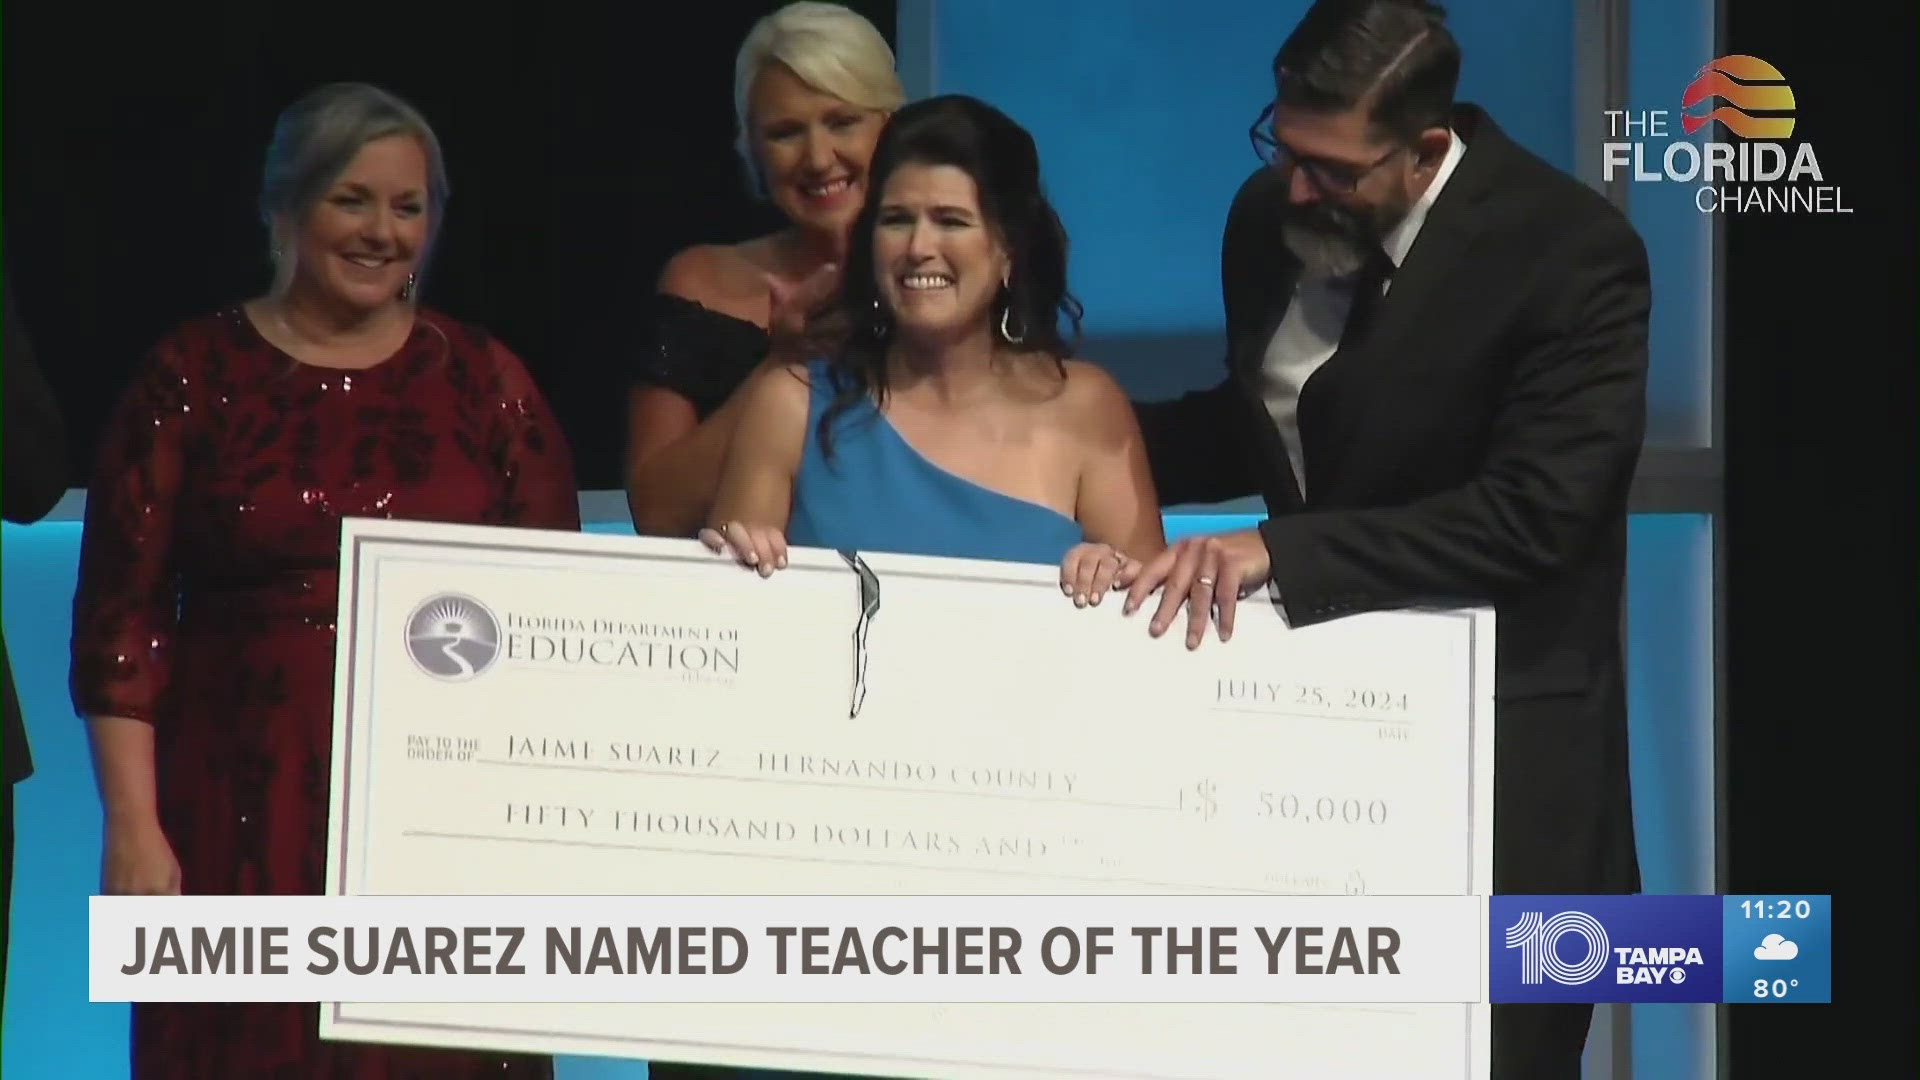 Suarez will spend the next year elevating and celebrating the teaching profession.